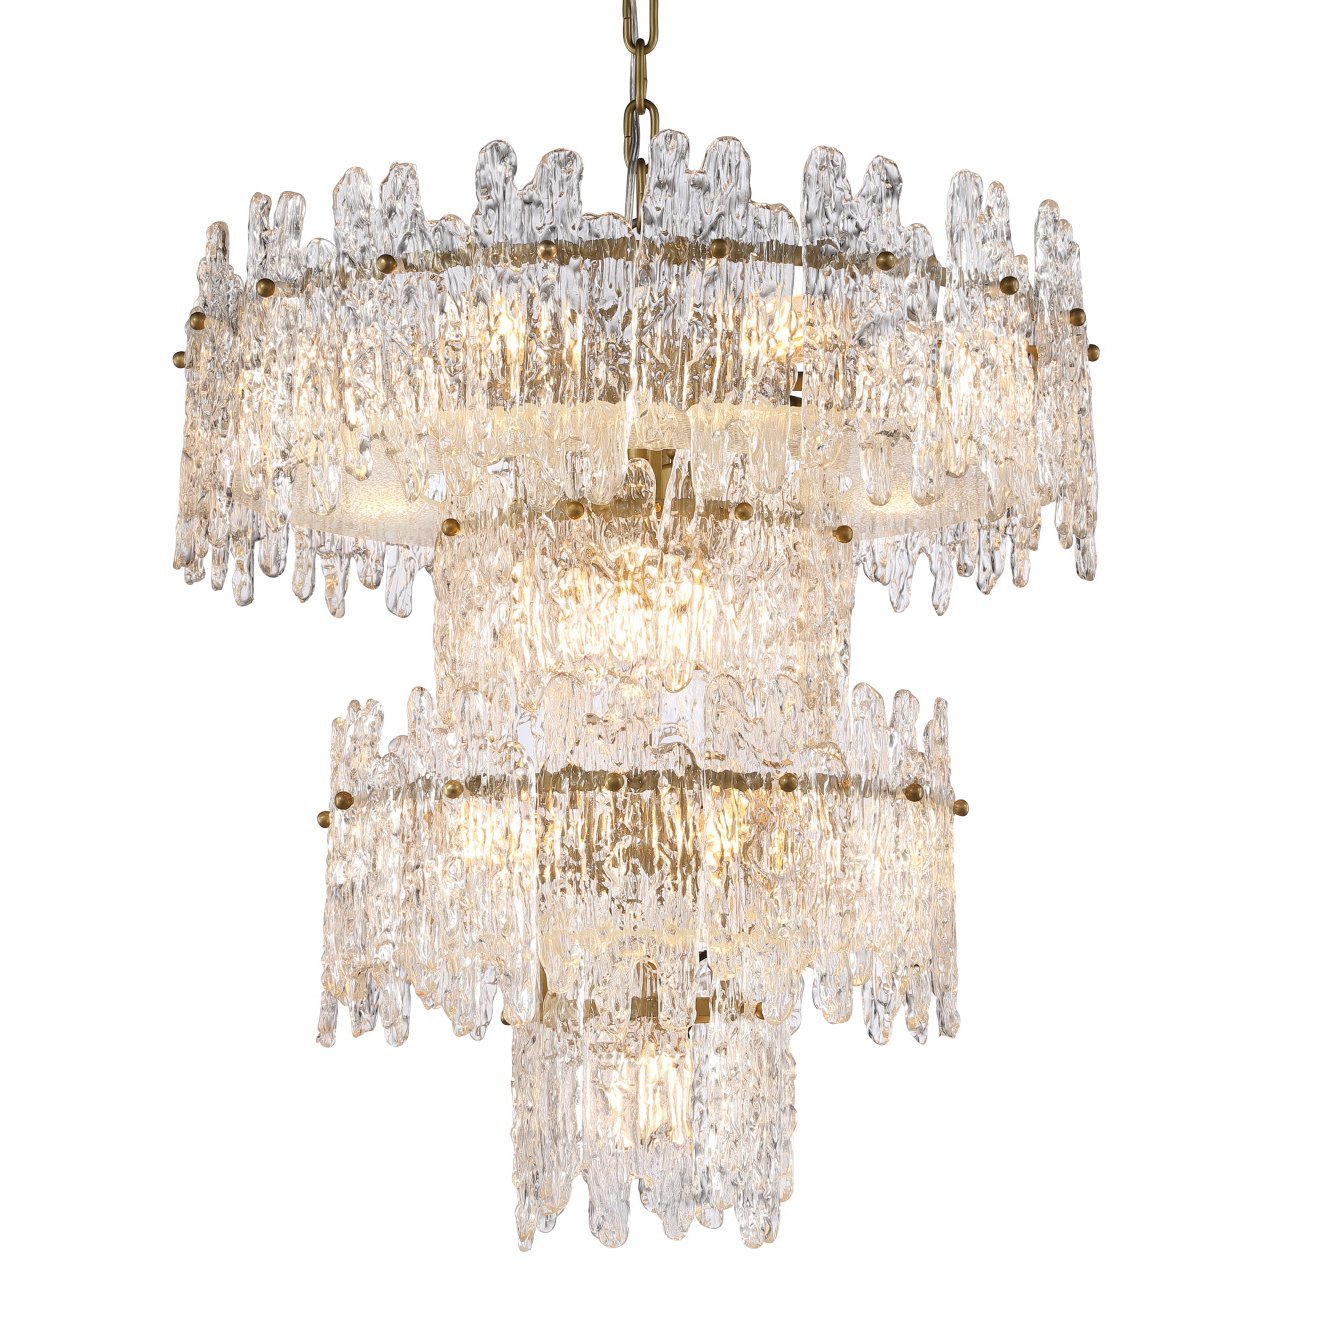 Faust Tiered Round Glass Chandelier - Italian Concept